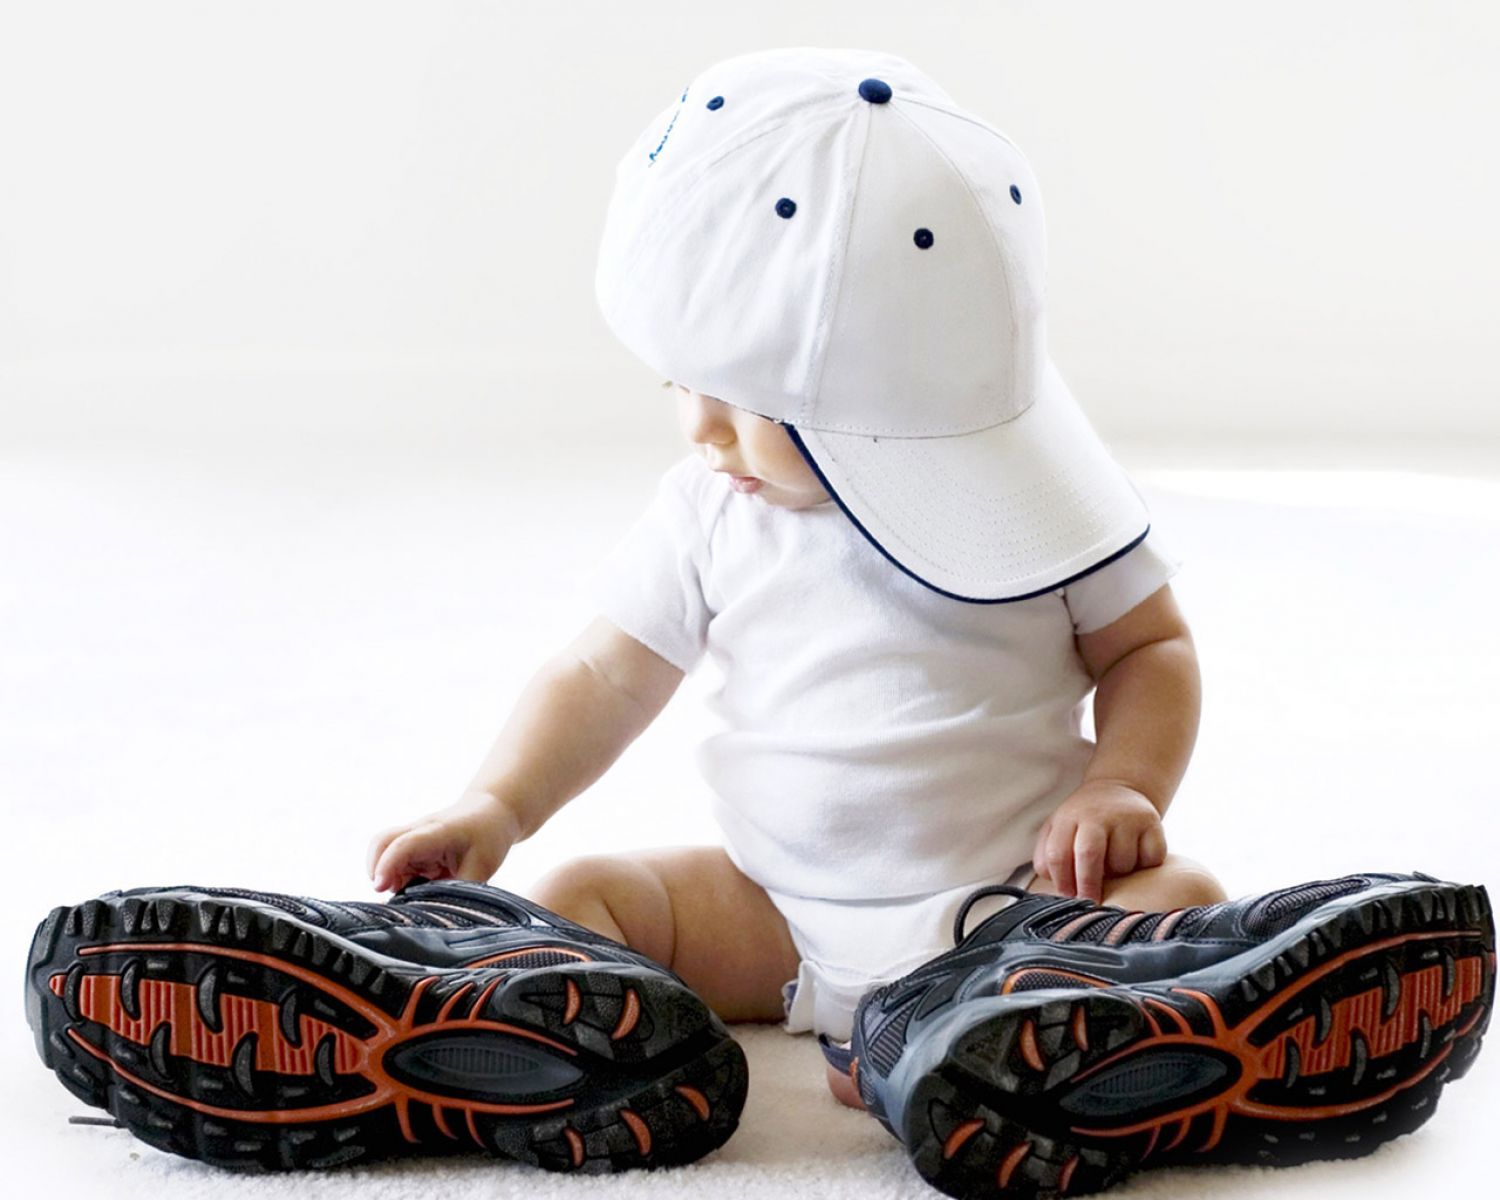 Baby Wearing Big Shoes. HD Cute Wallpaper for Mobile and Desktop